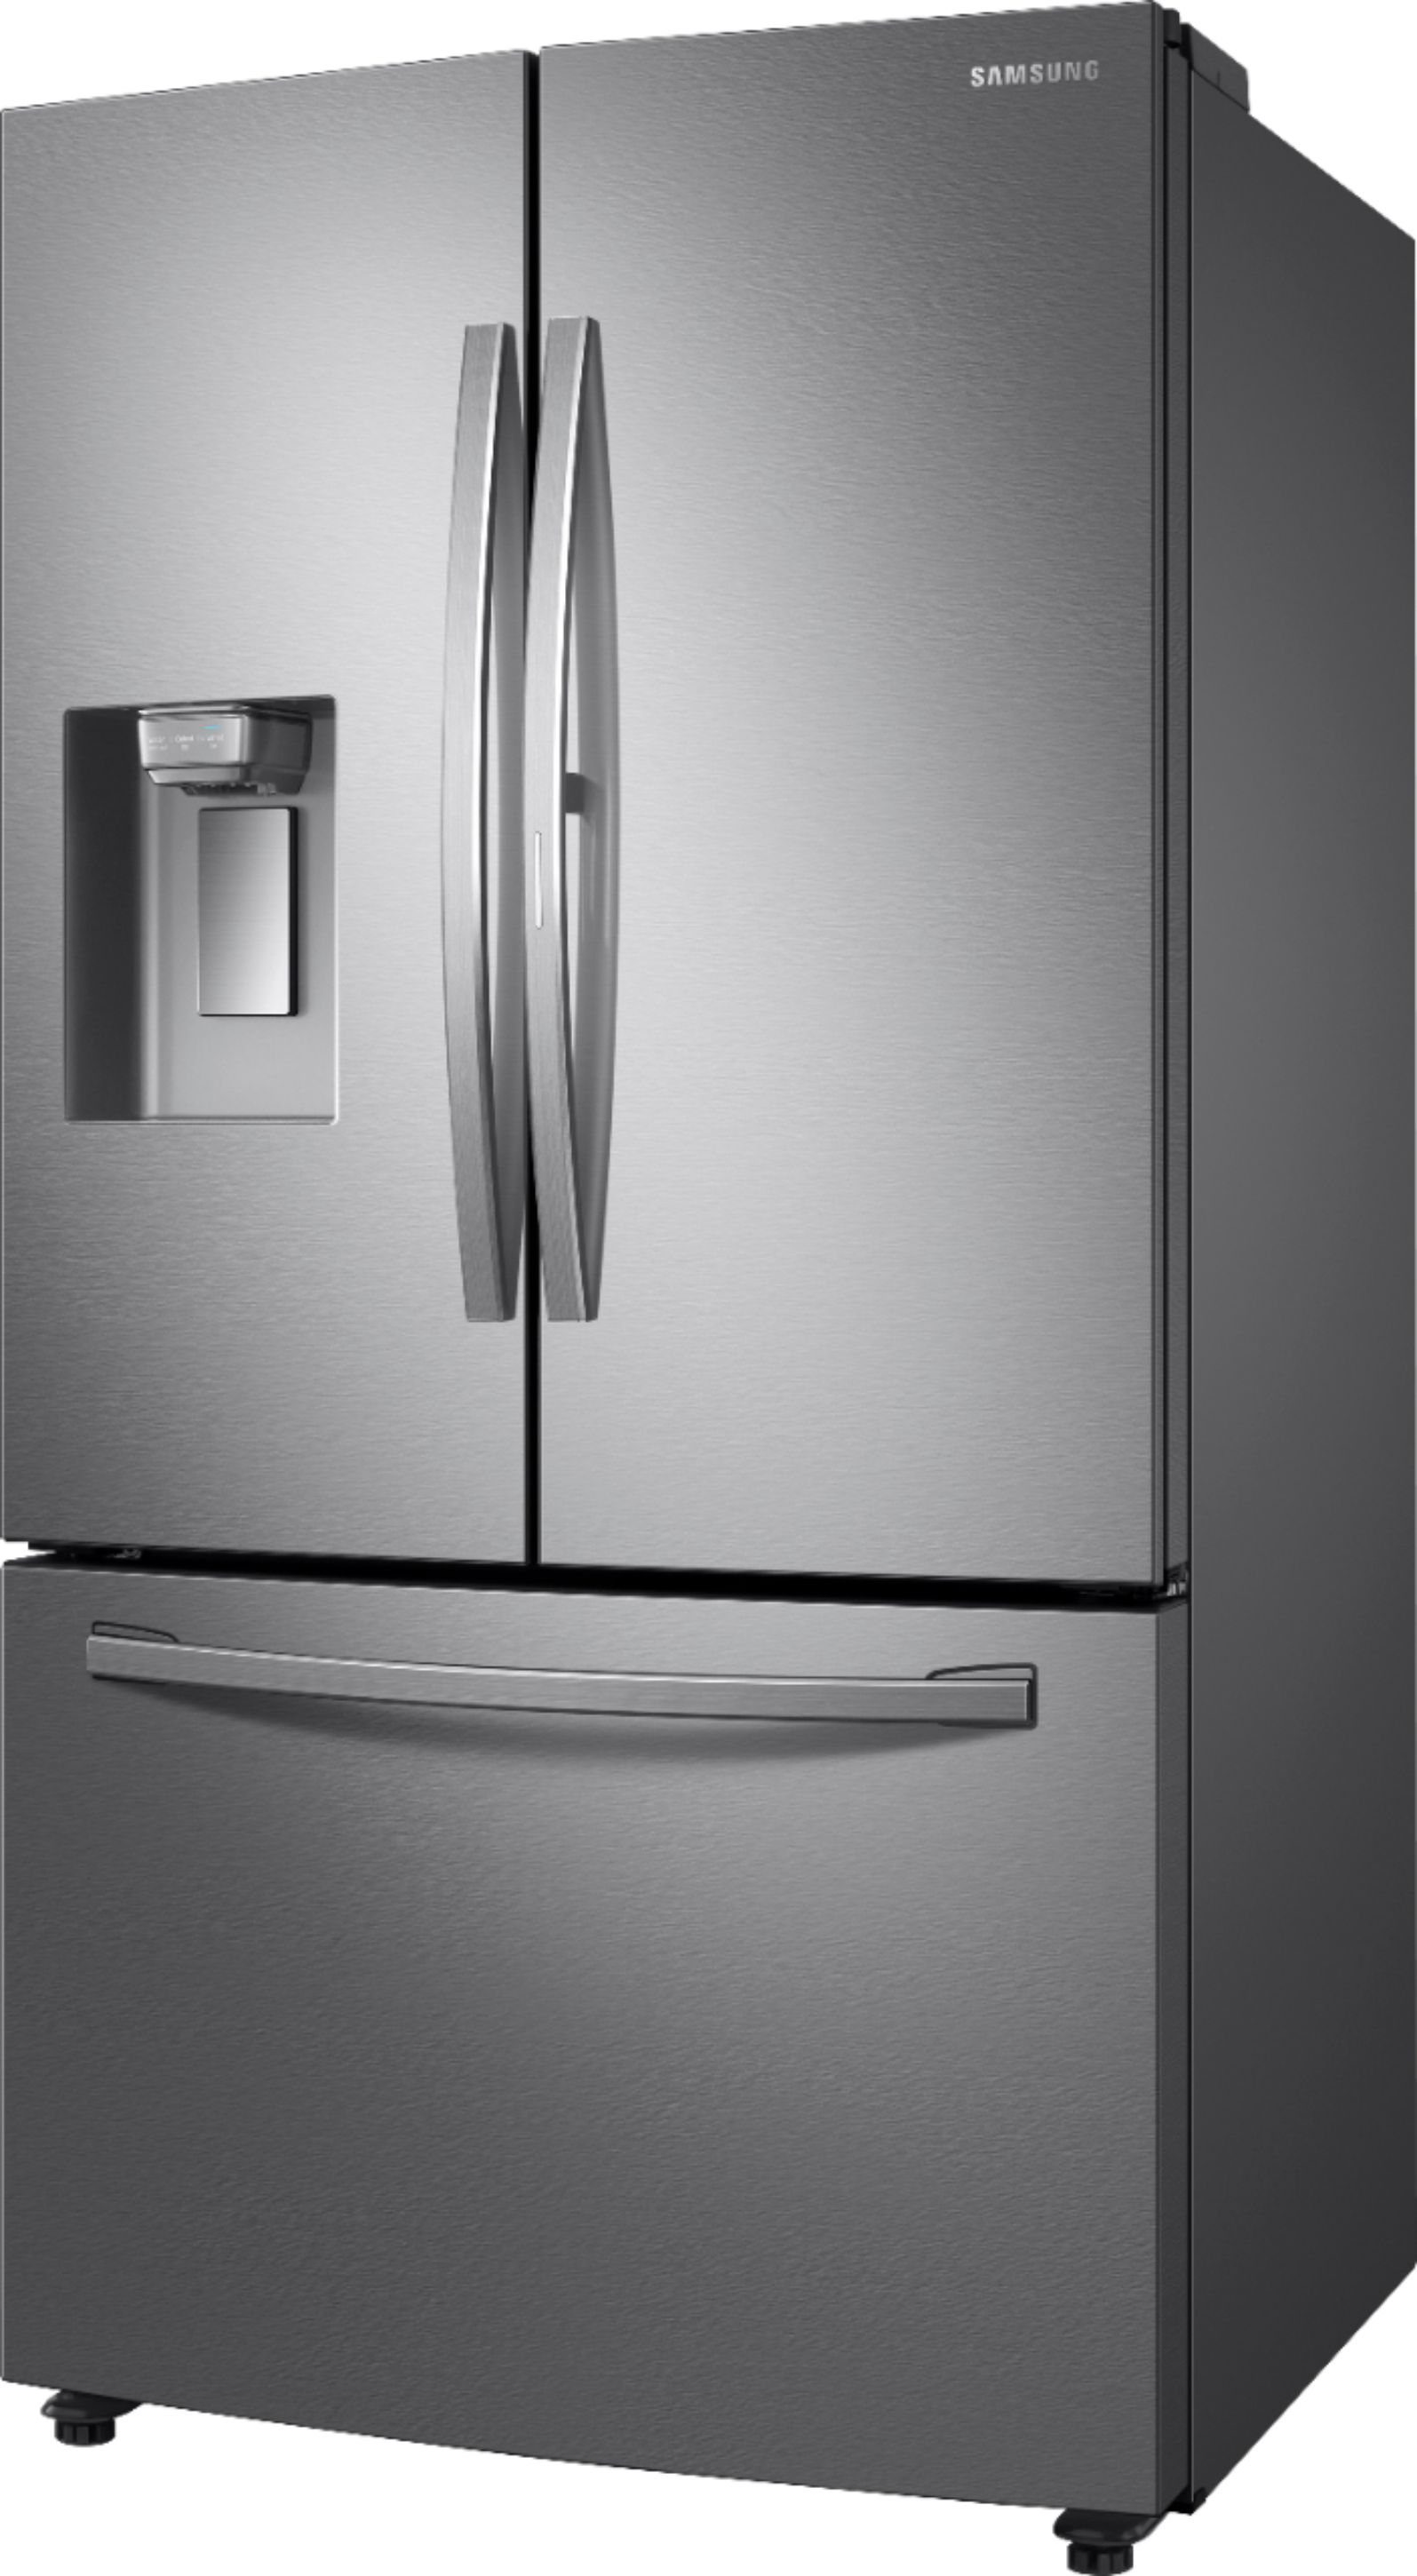 Left View: Samsung - 27.8 Cu. Ft. French Door Fingerprint Resistant Refrigerator with Food Showcase - Stainless steel